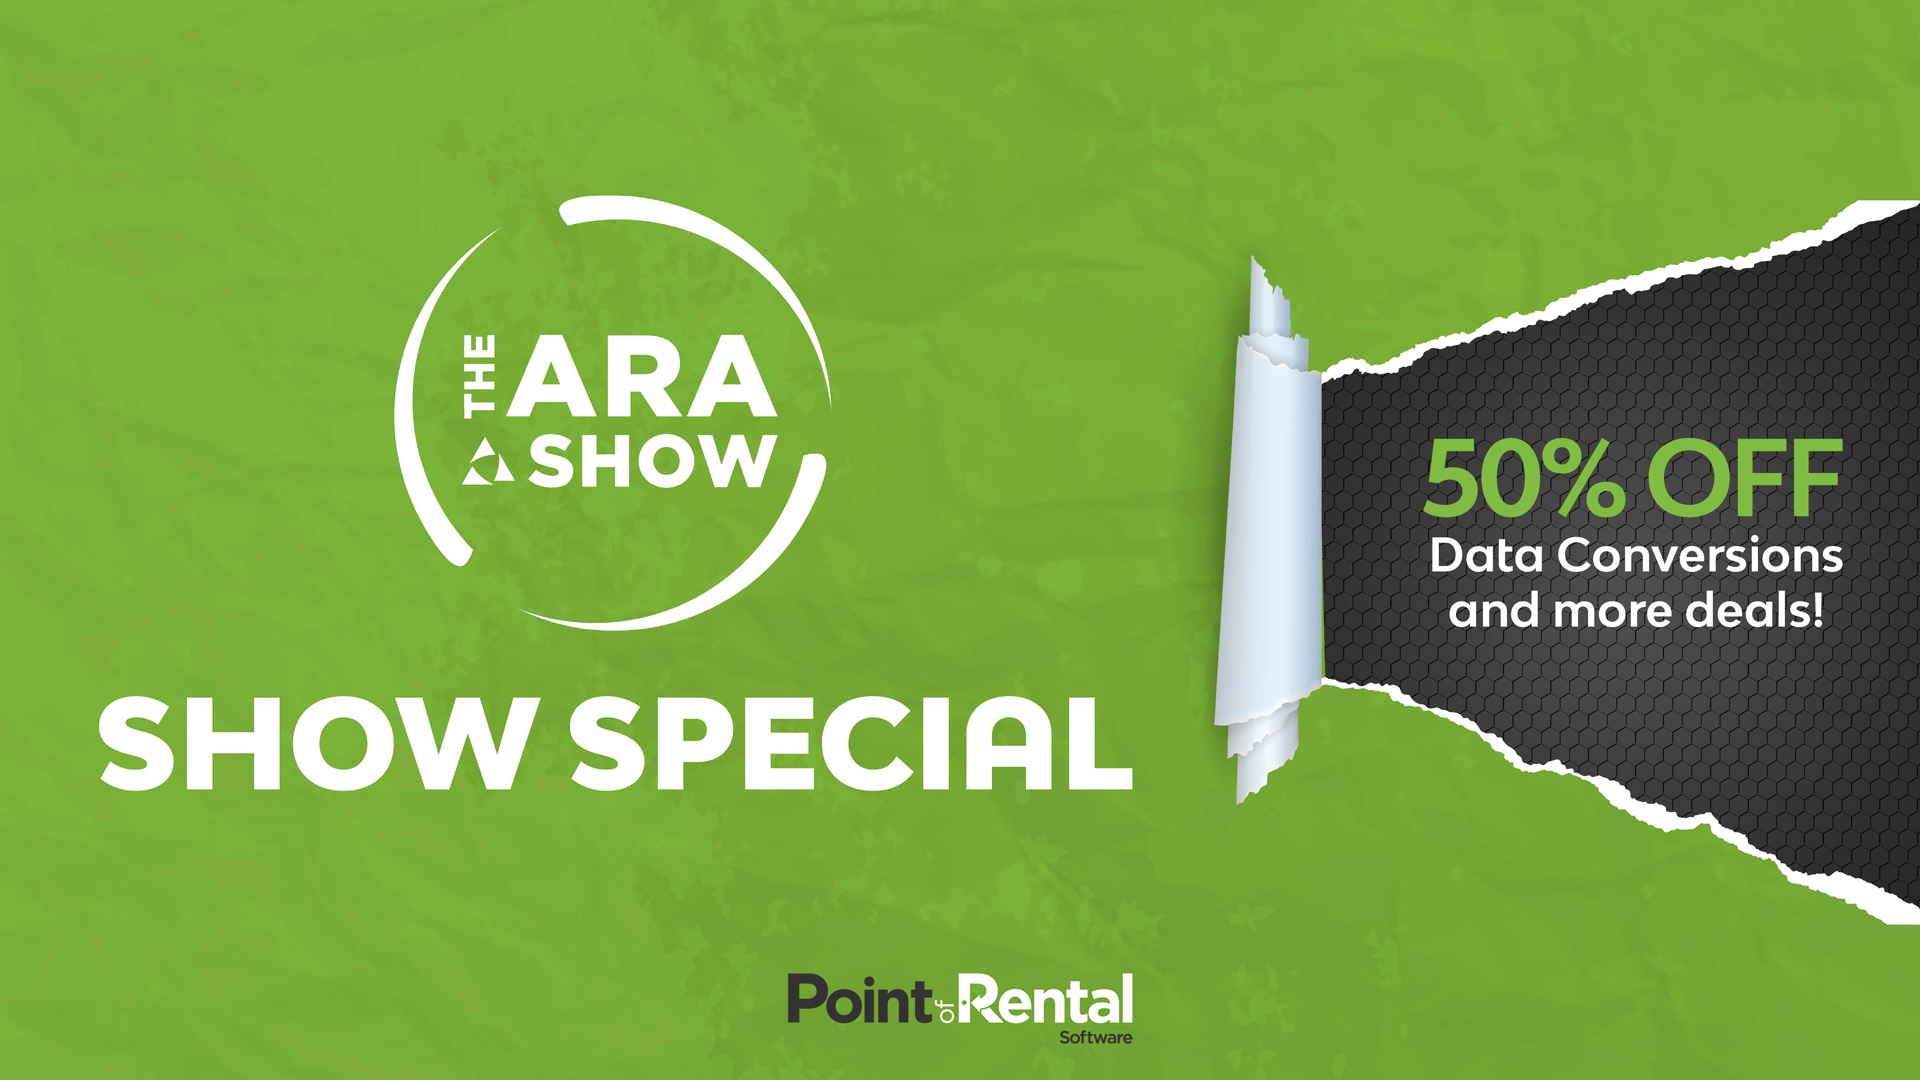 Point of Rental's 2020 ARA Show specials include 50% off data conversions